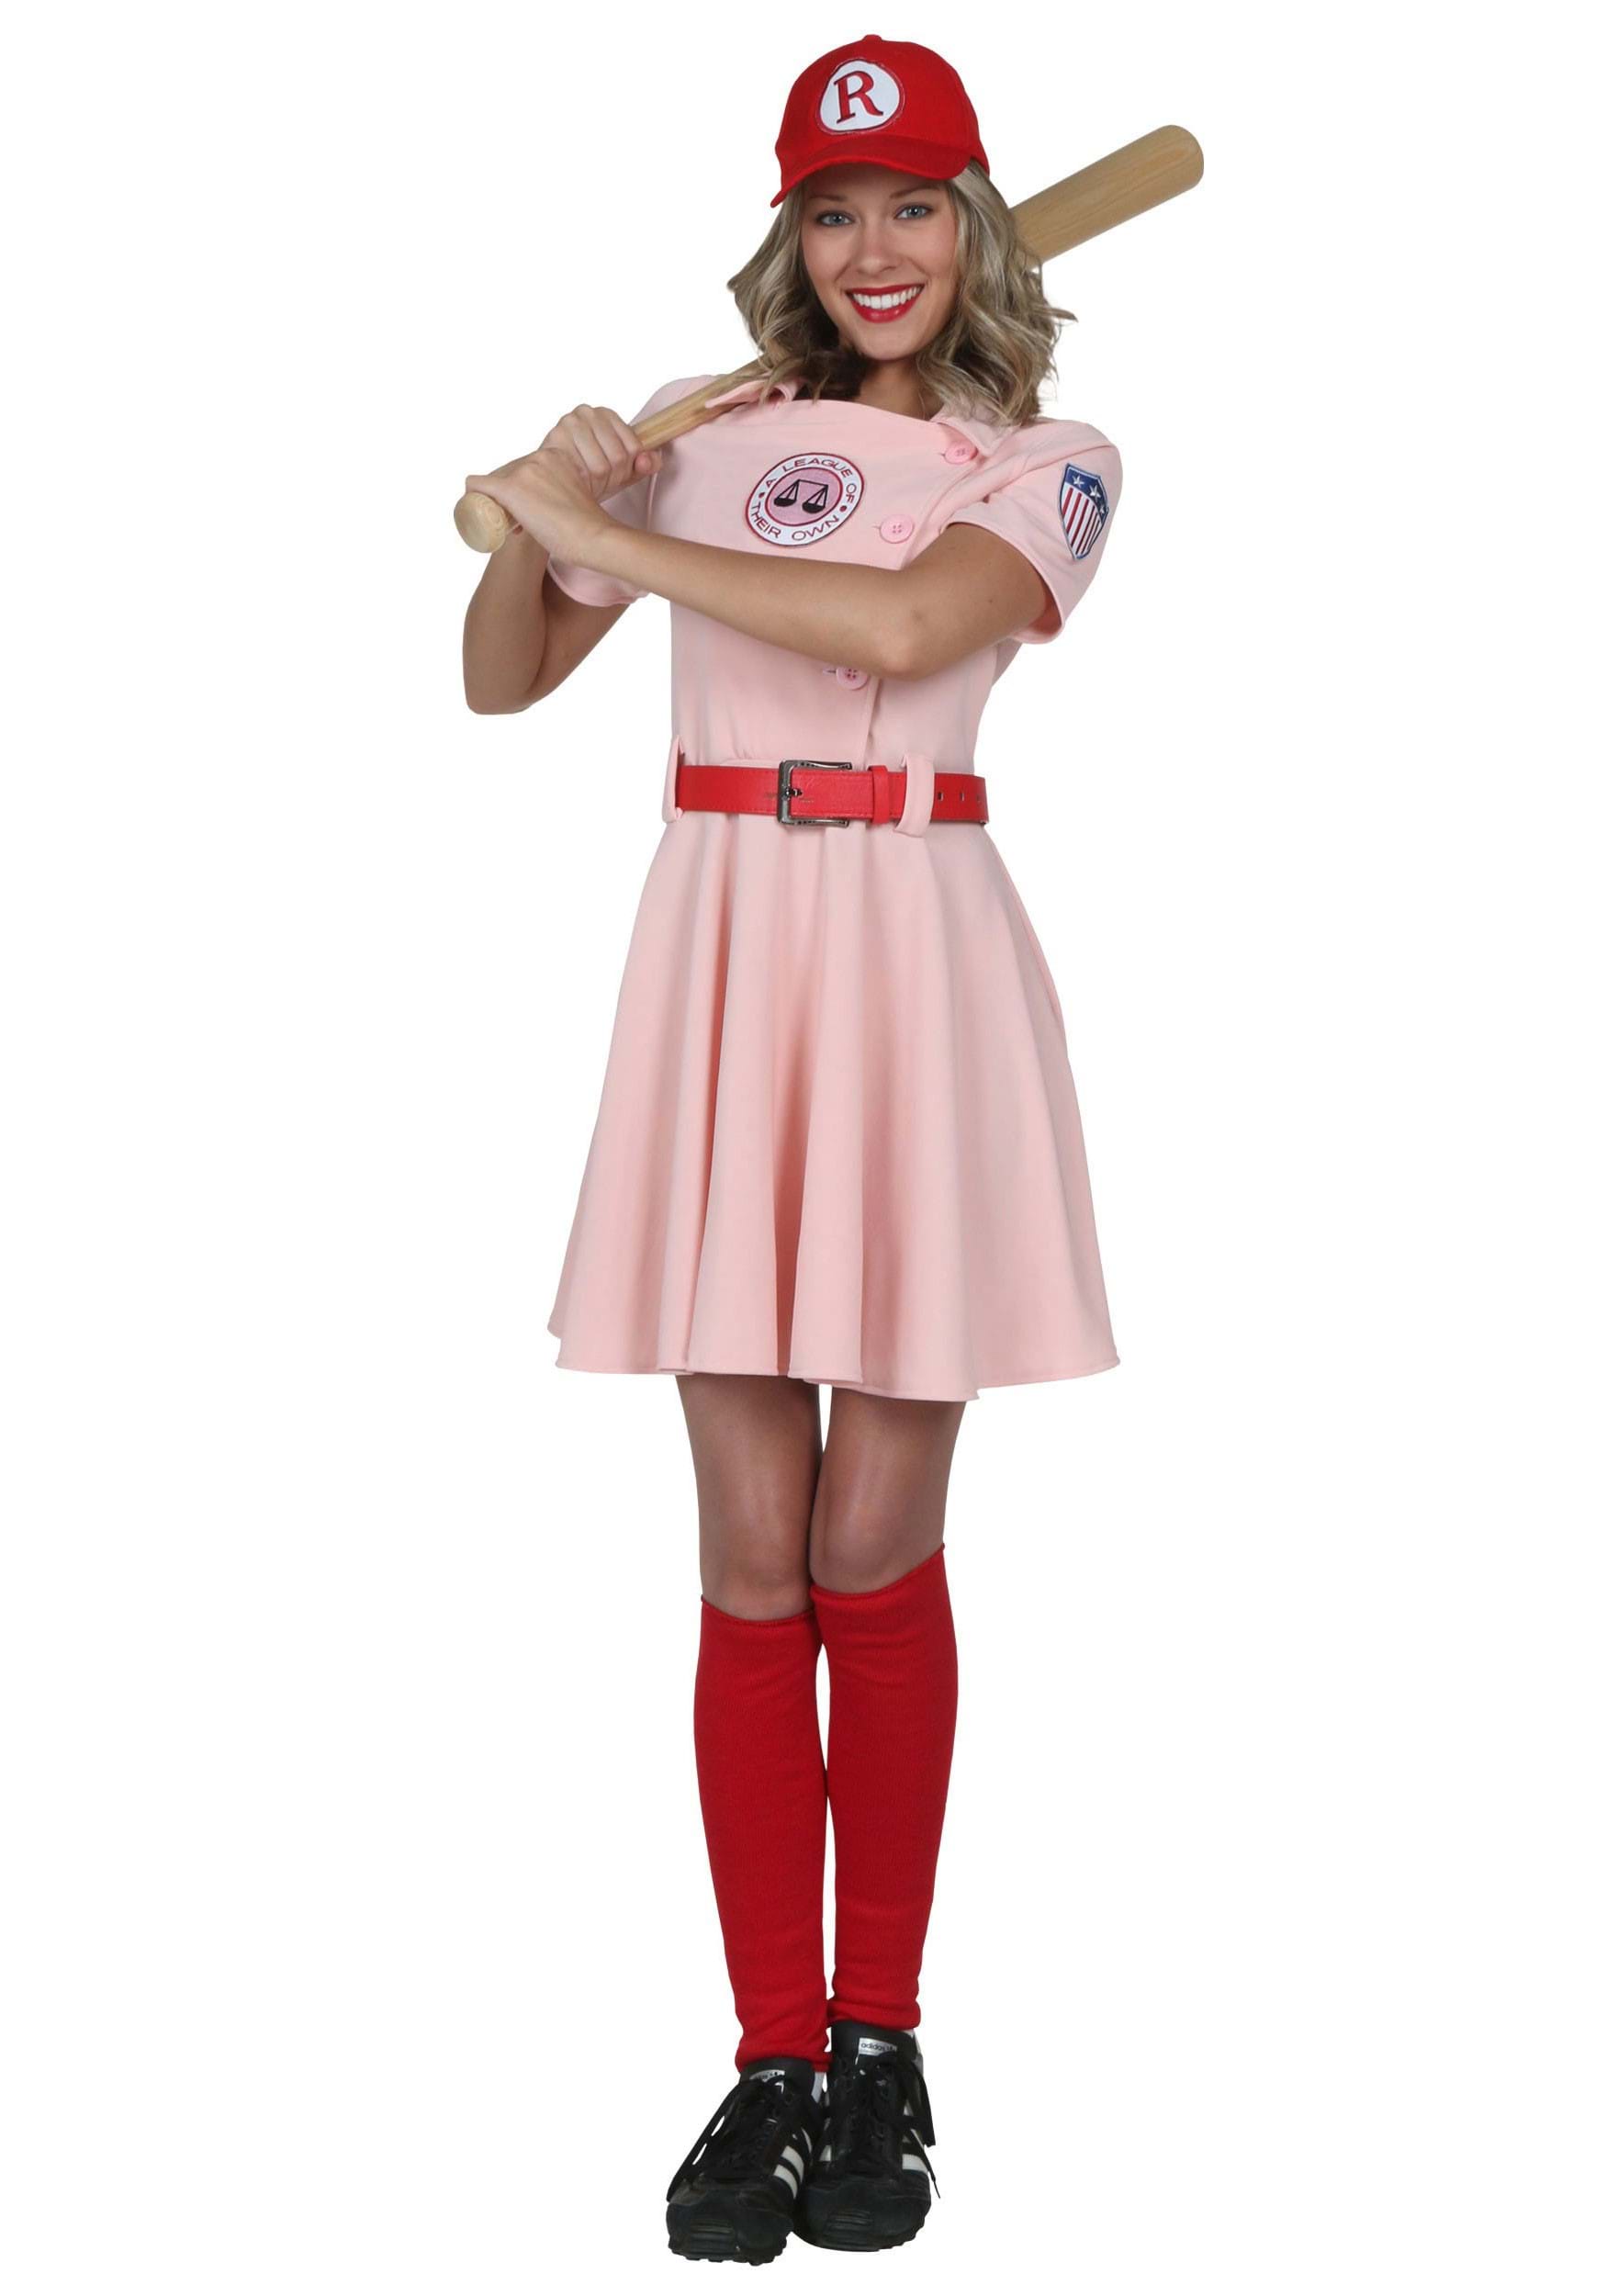 1940s Costumes- WWII, Nurse, Pinup, Rosie the Riveter A League of Their Own Deluxe Dottie Costume $79.99 AT vintagedancer.com